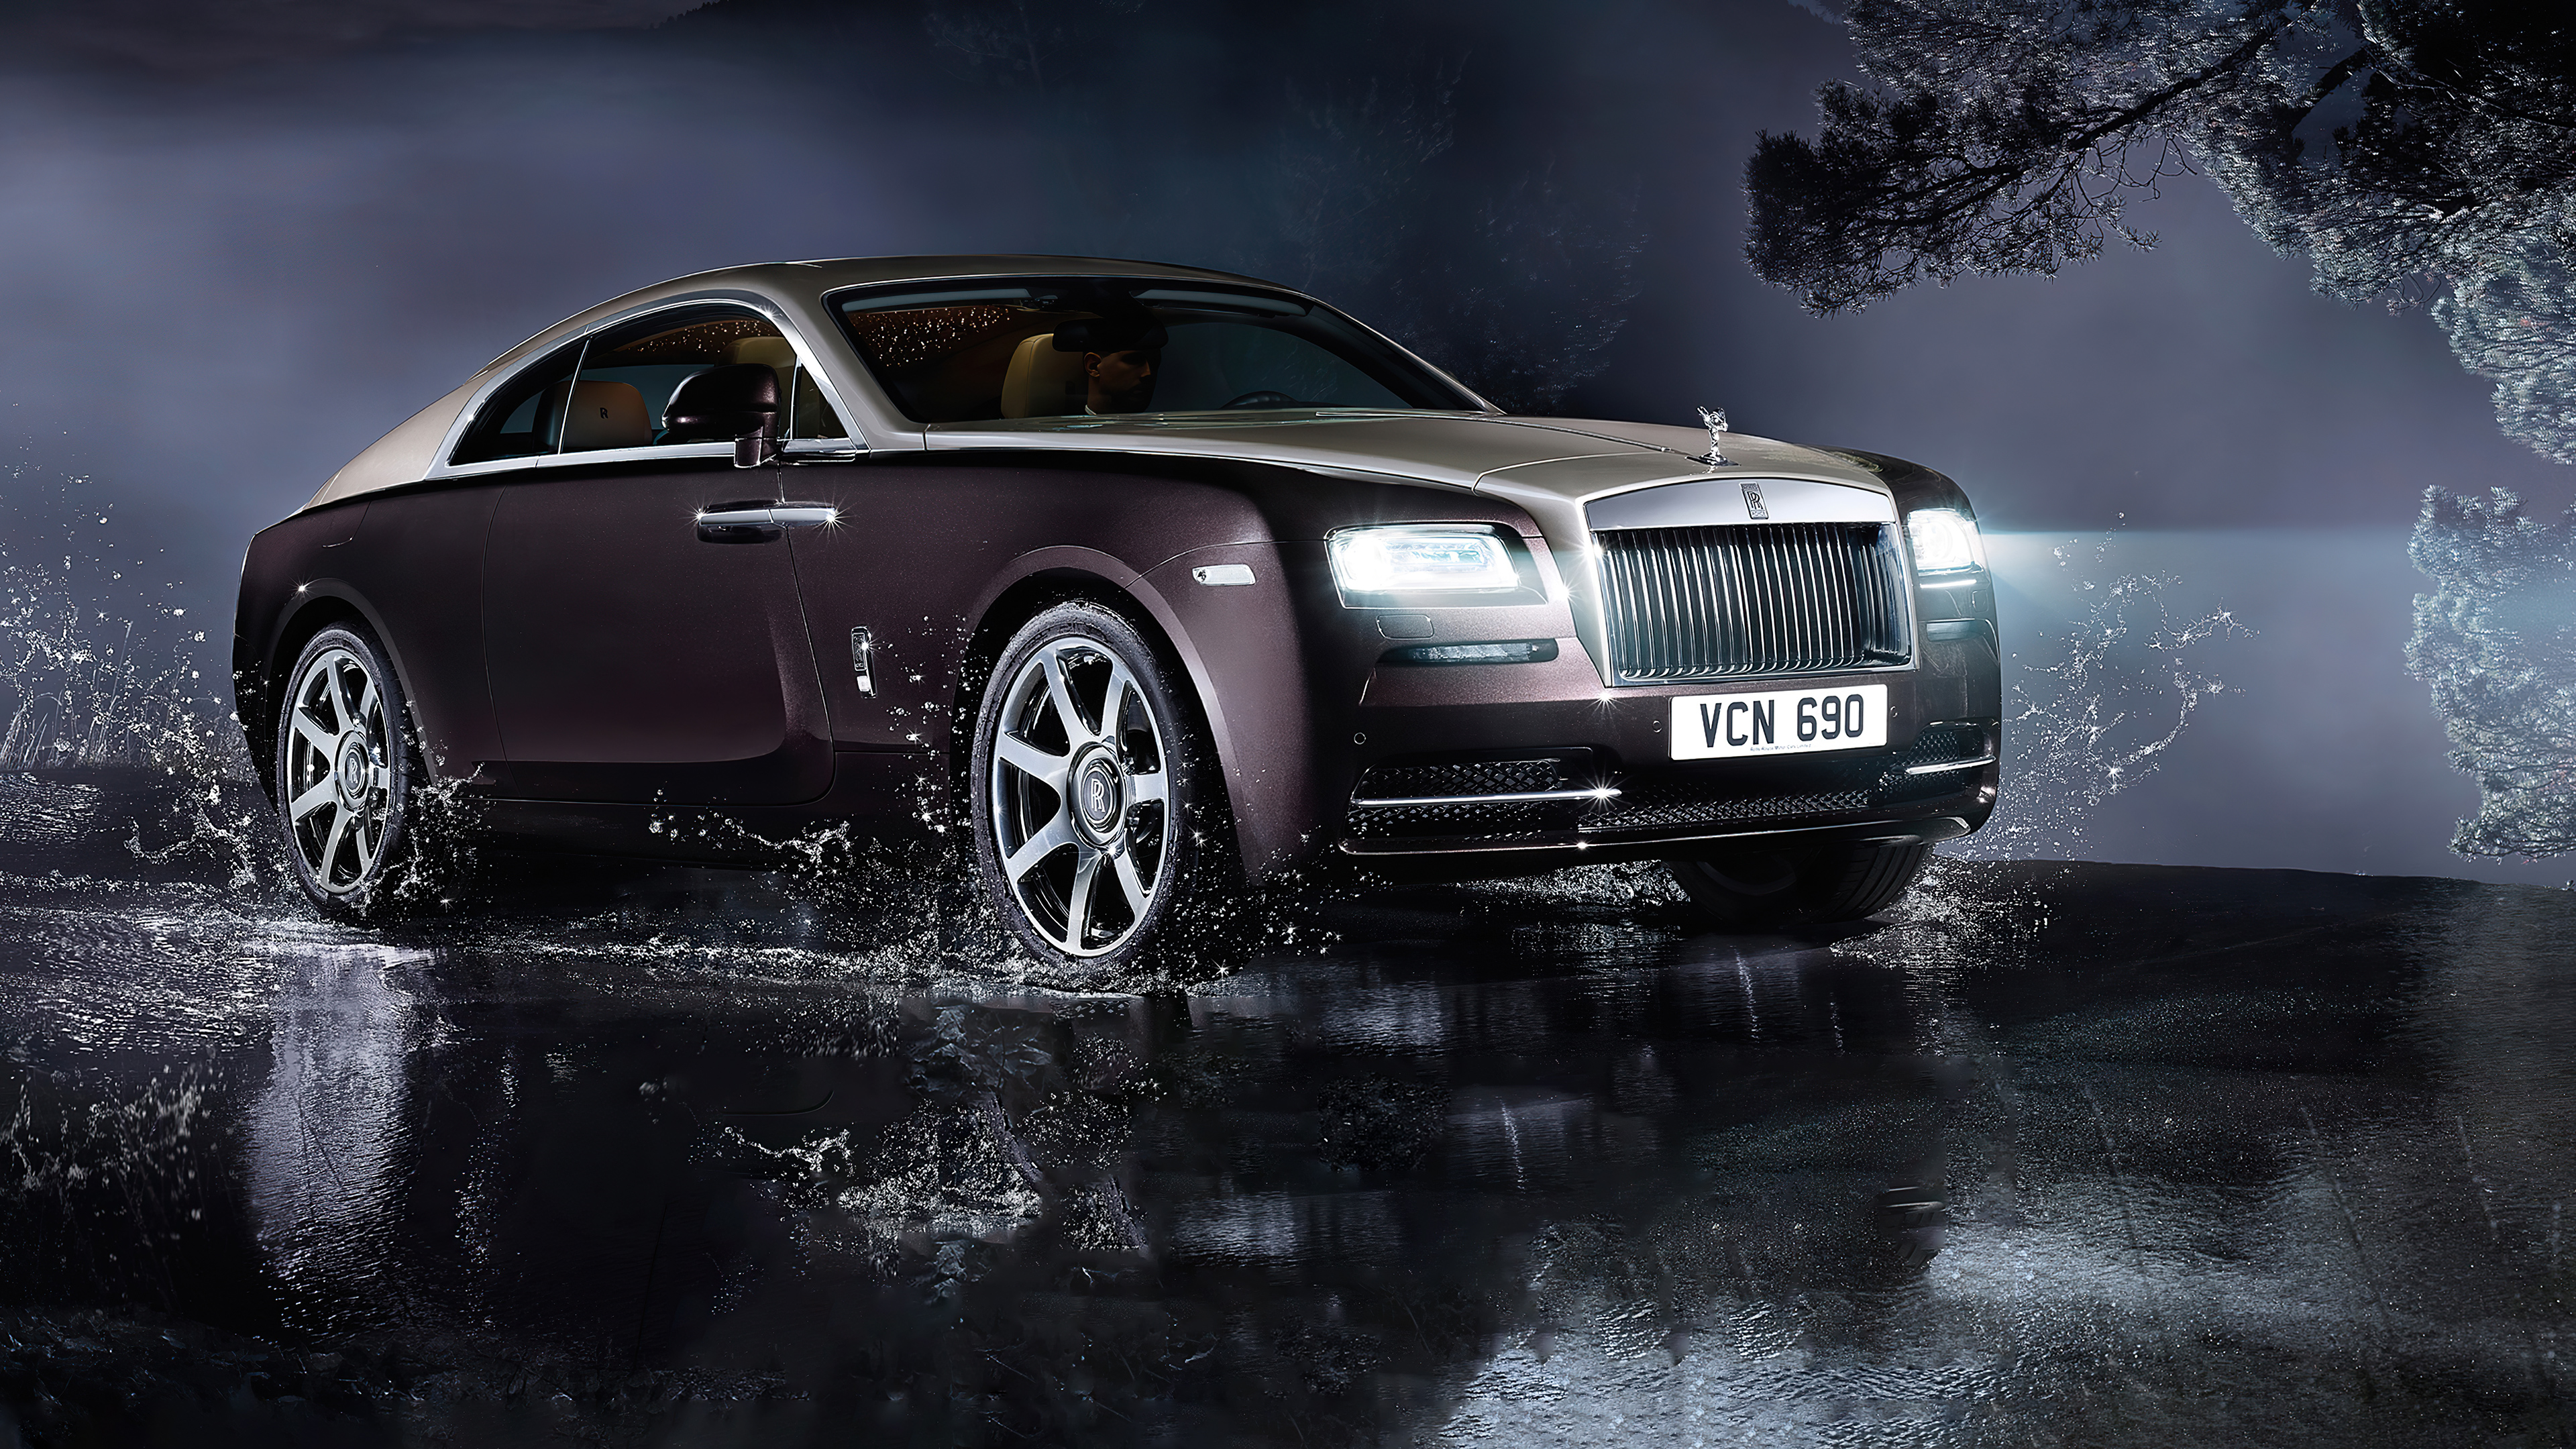 Free photo The Rolls Royce Wraith is driving on water.